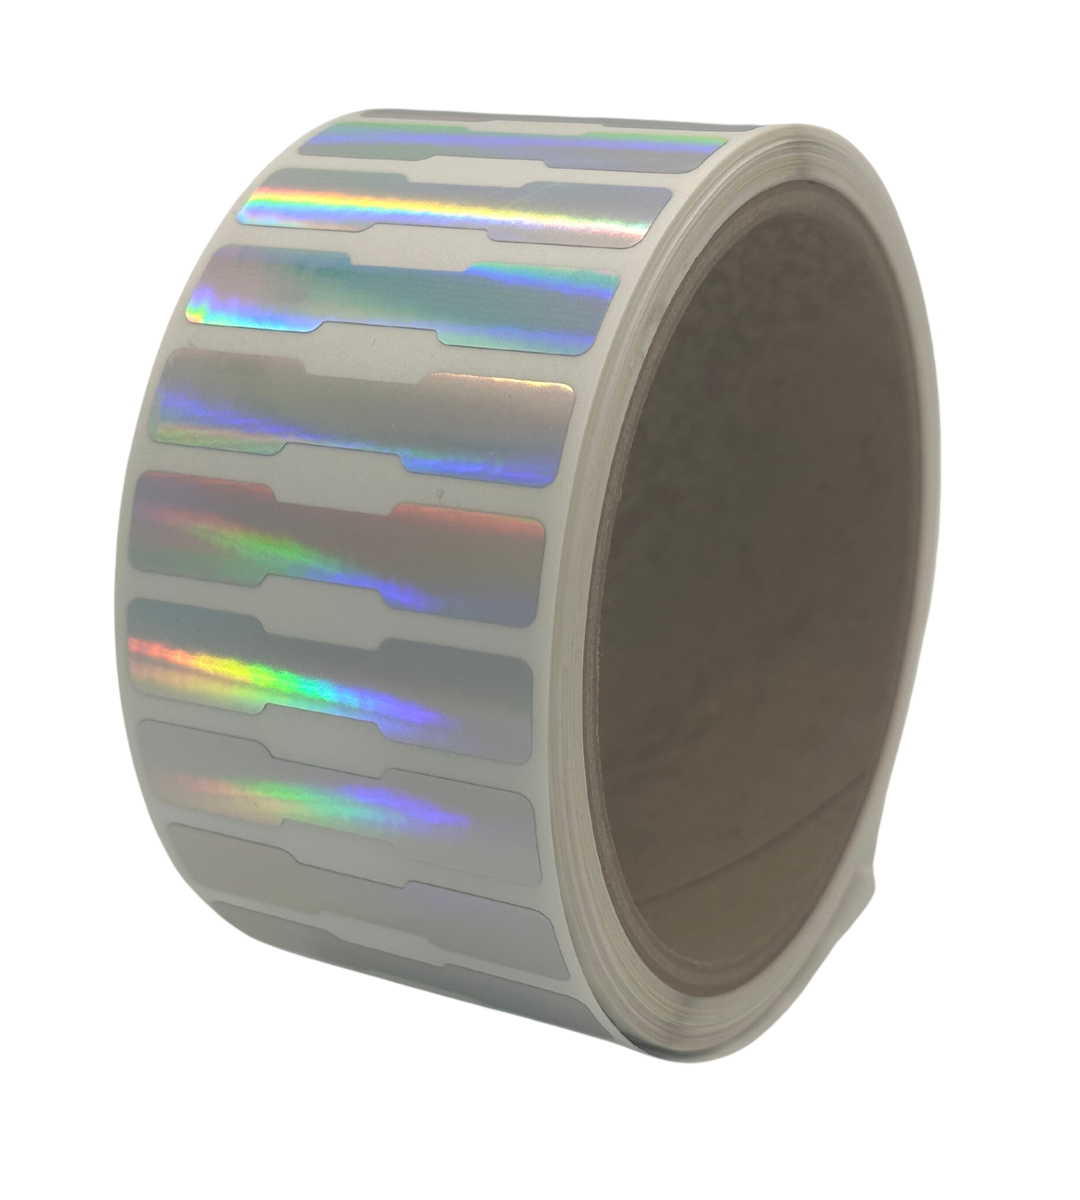 2,000 Rainbow Tamper-Evident Security Labels TamperColor® Seal Stickers, Dogbone Shape Size 1.75" x 0.375 (44mm x 9mm).